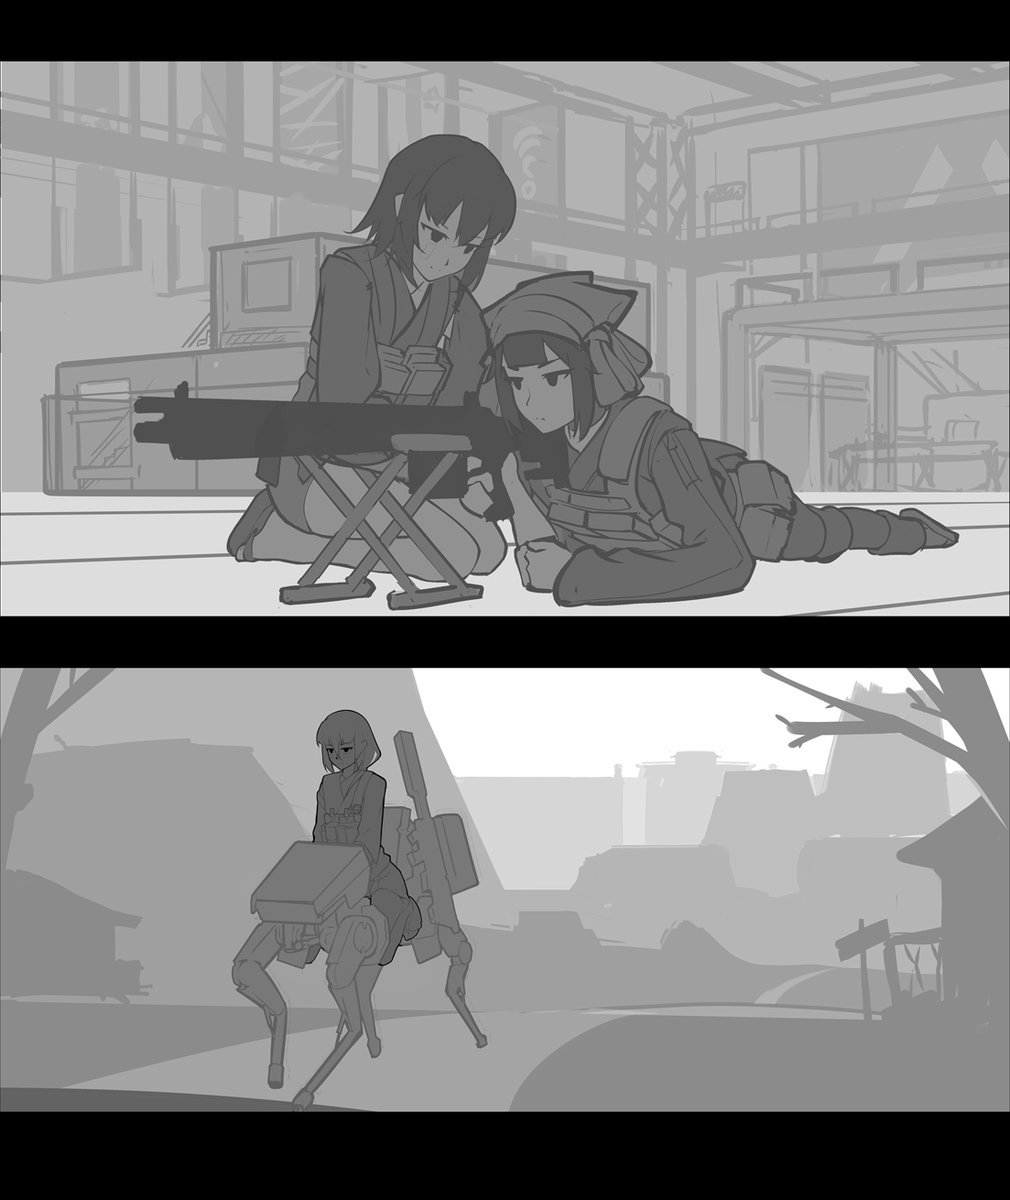 Some WIPs from 2021...that said, with only 5 days of 2021 left, it's not like I can finish these in 2021 anyway so...well,......F 